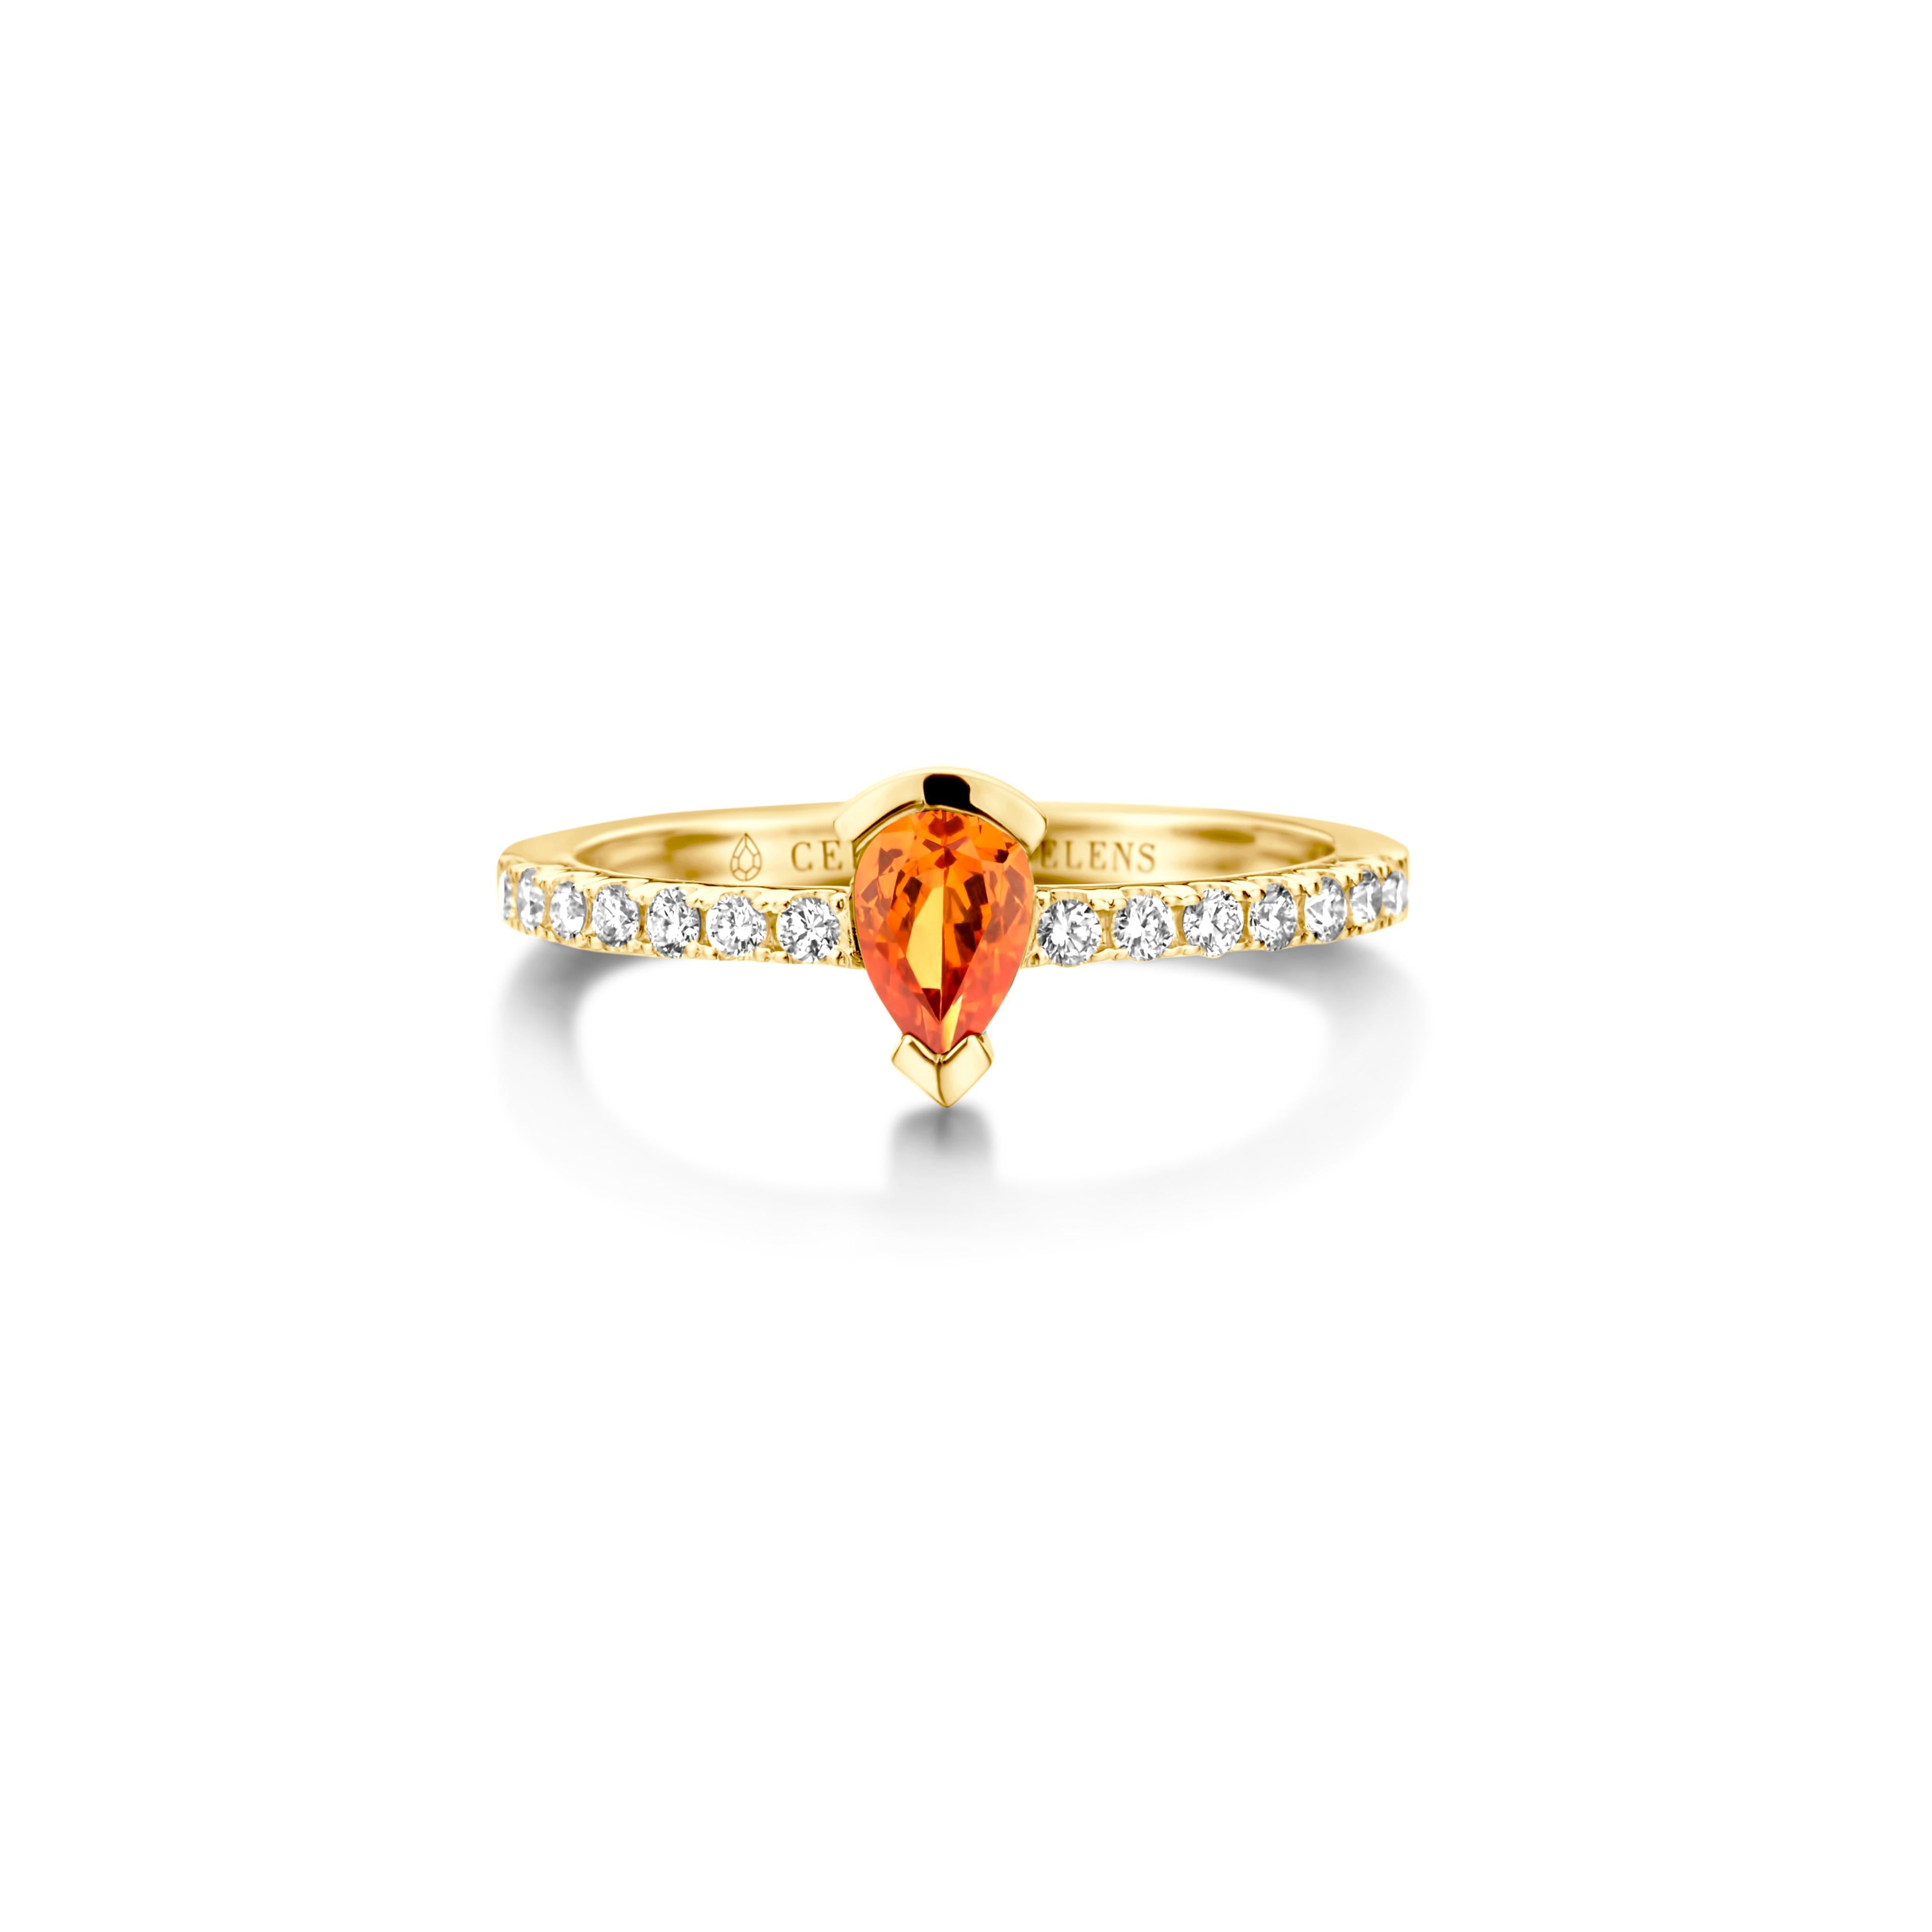 Adeline Straight ring in 18Kt white gold set with a pear-shaped mandarin garnet and 0,24 Ct of white brilliant cut diamonds - VS F quality. Also, available in yellow gold and white gold. Celine Roelens, a goldsmith and gemologist, is specialized in